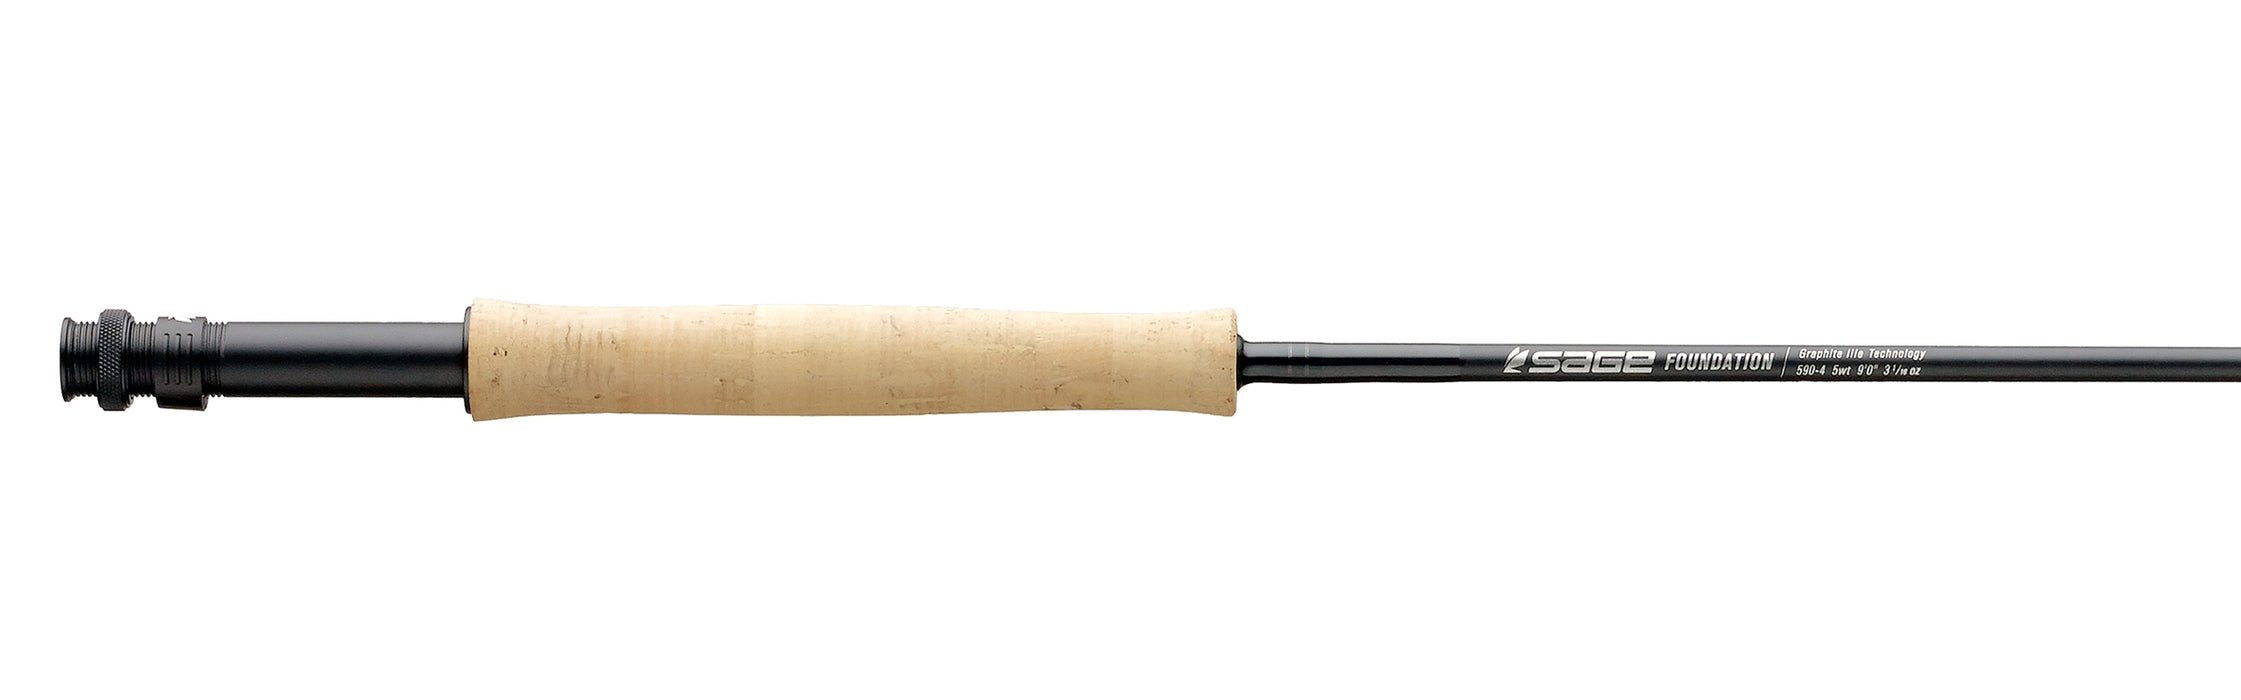 Sage 2013 Fly Rod Lineup Trident Fly Fishing, 44% OFF